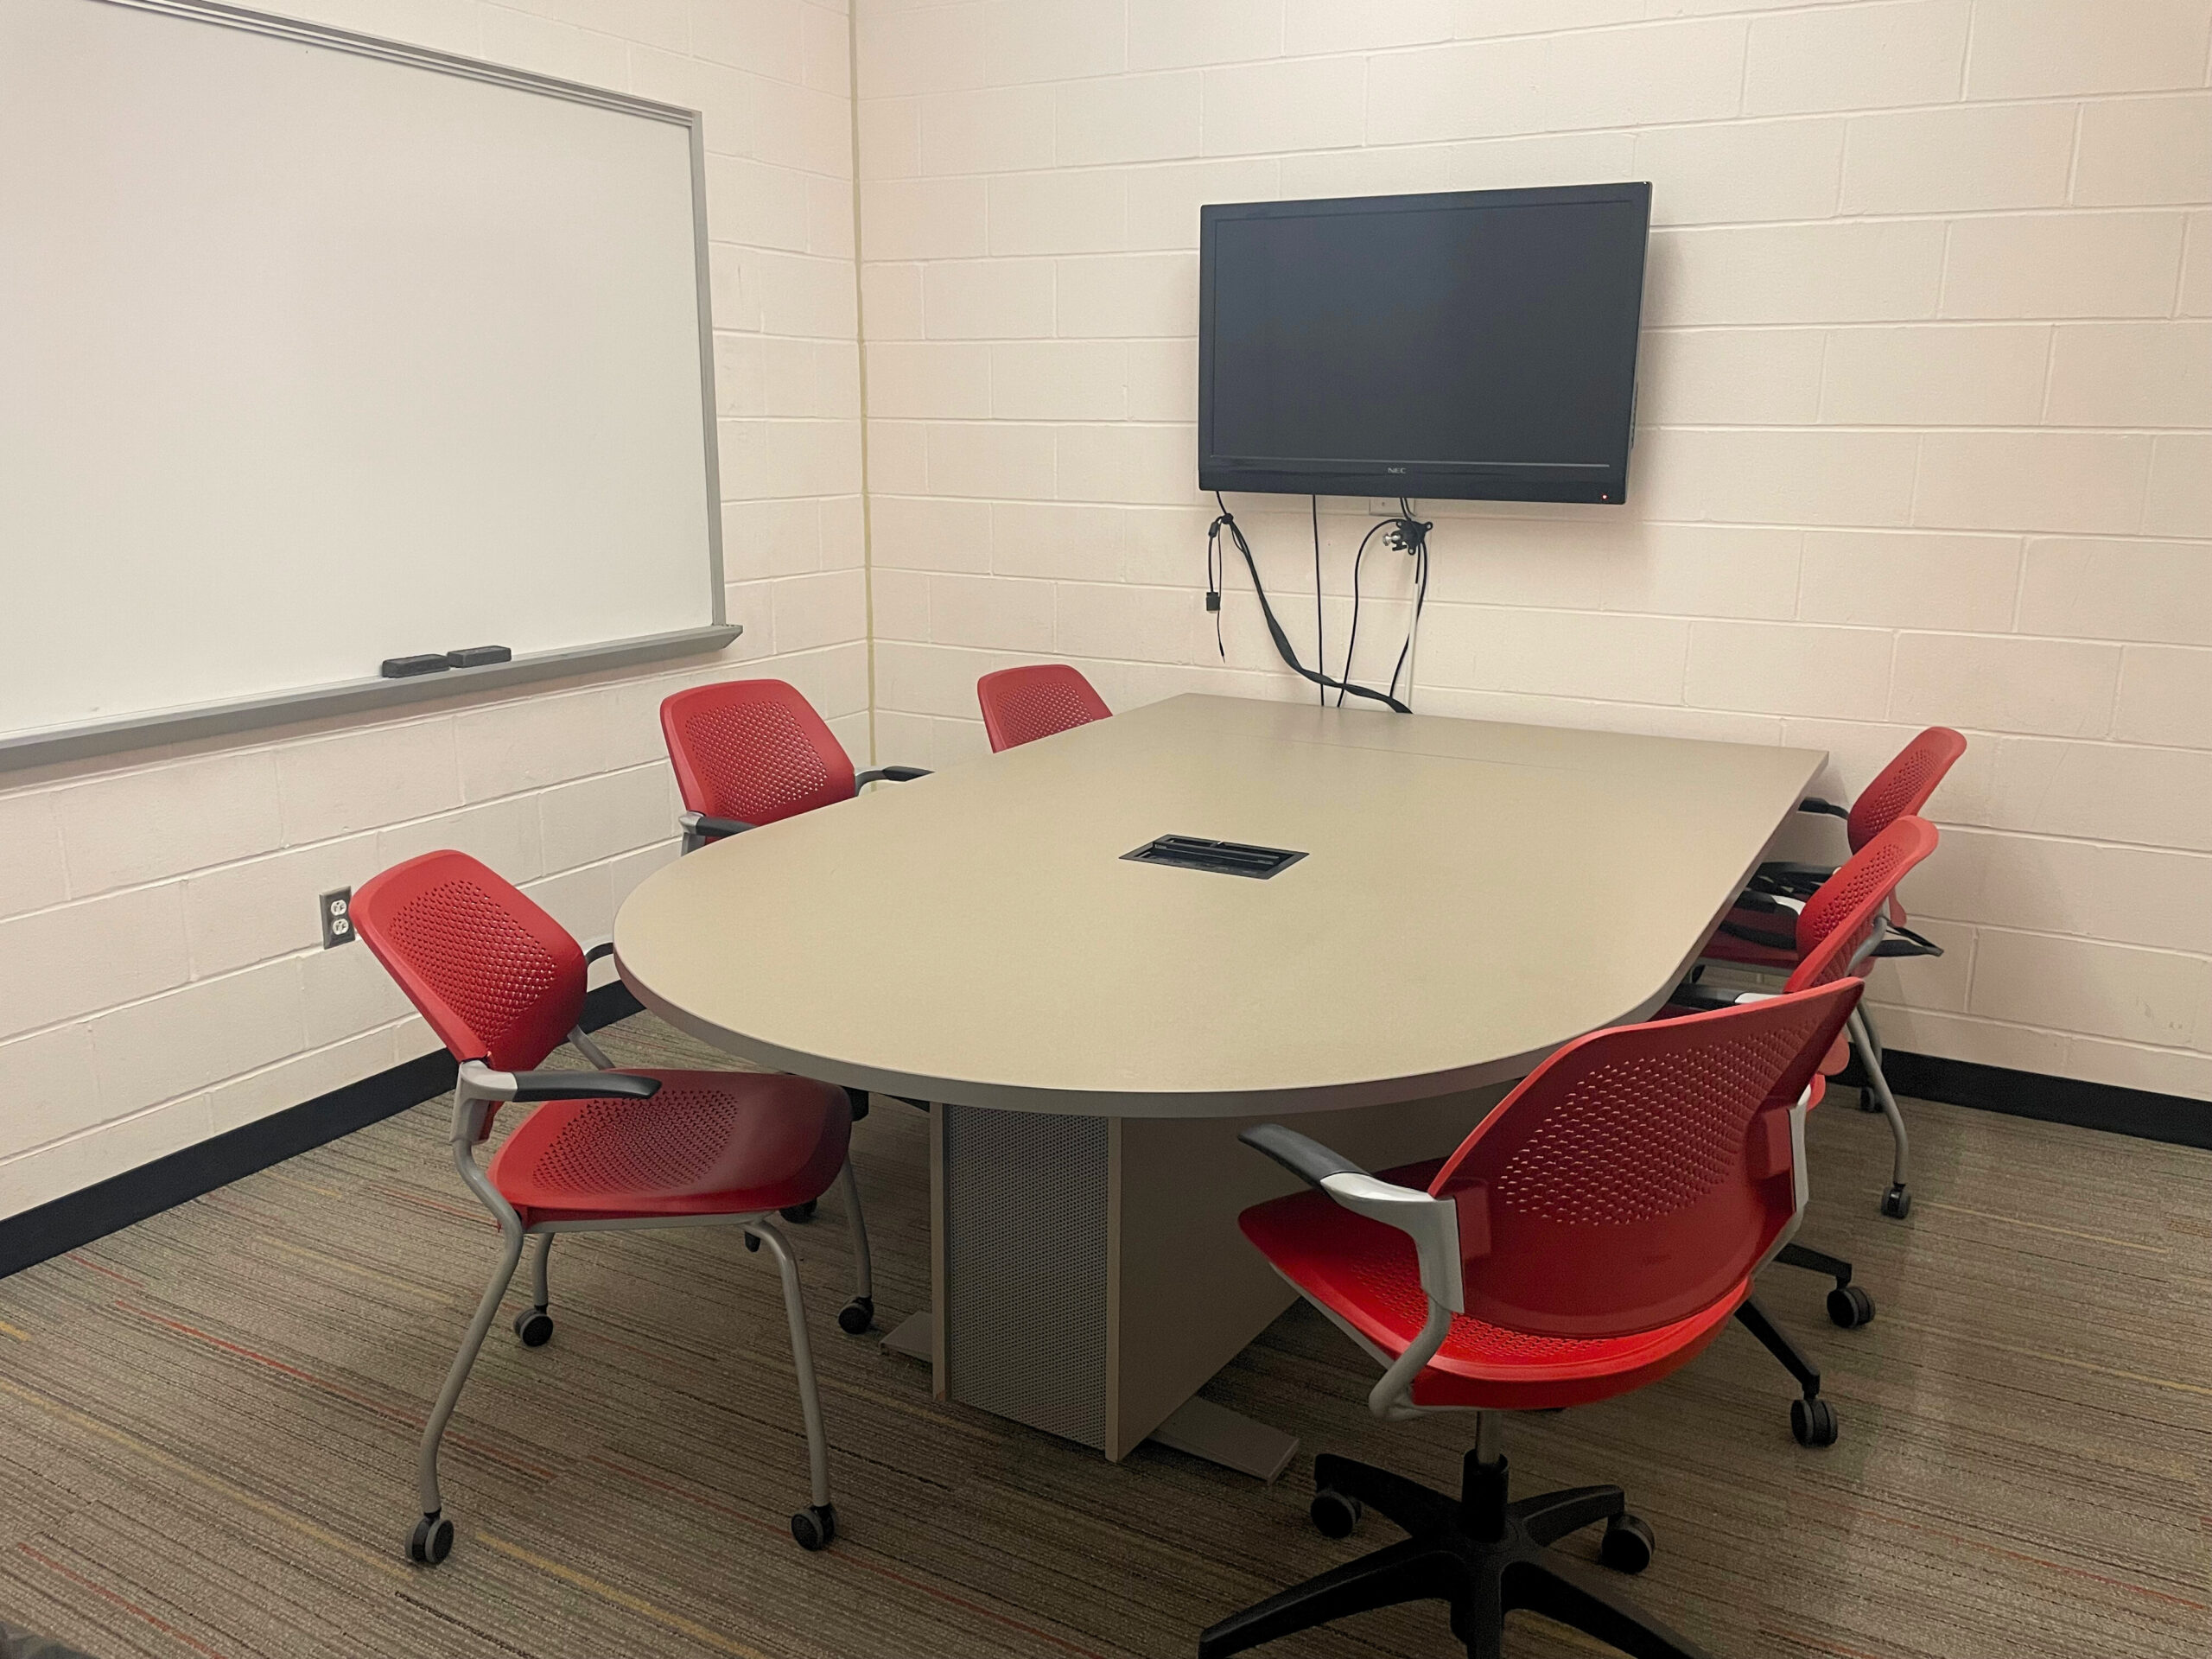 Conference room with display and 6 chairs.